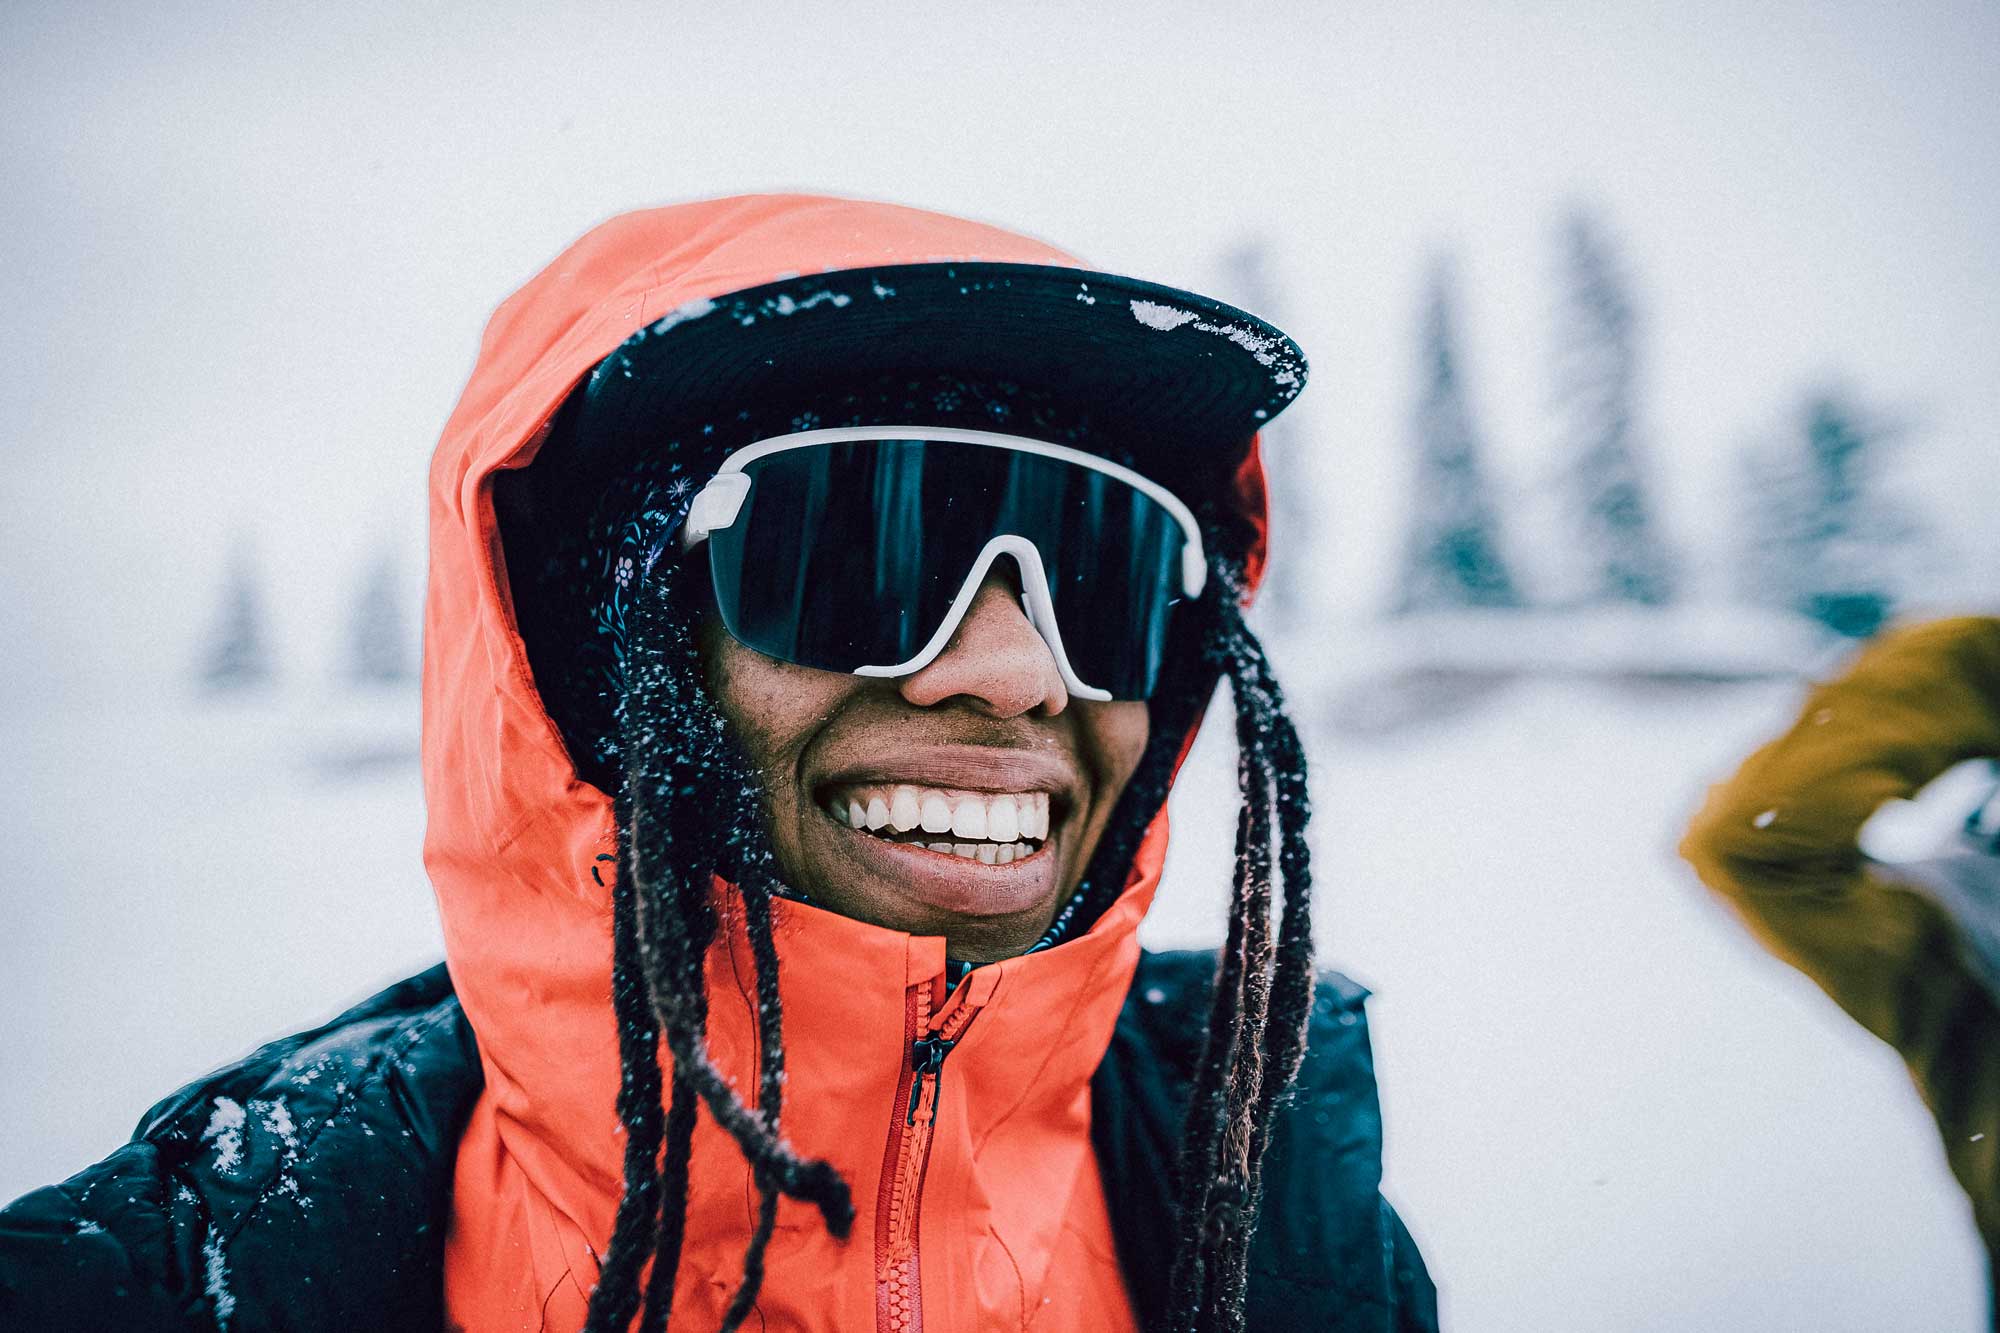 Smith, the new eyewear collection for snow sports - The Pill Outdoor Journal